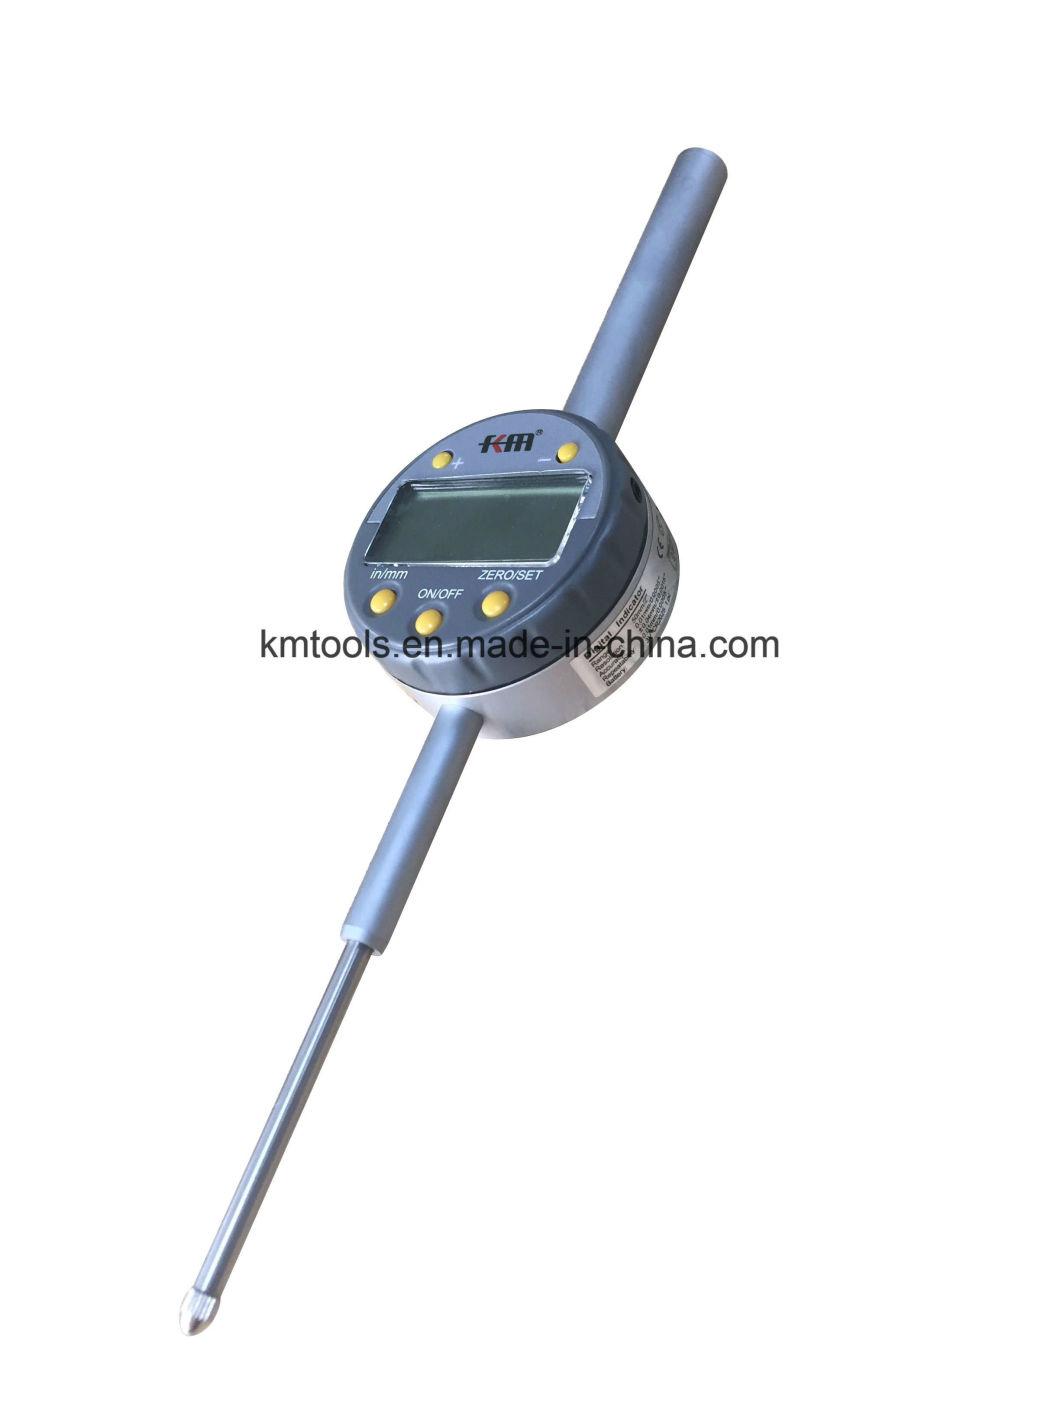 0-50mm/0-2′′ Digital Dial Indicator with 0.01mm/0.0005′′ Resolution